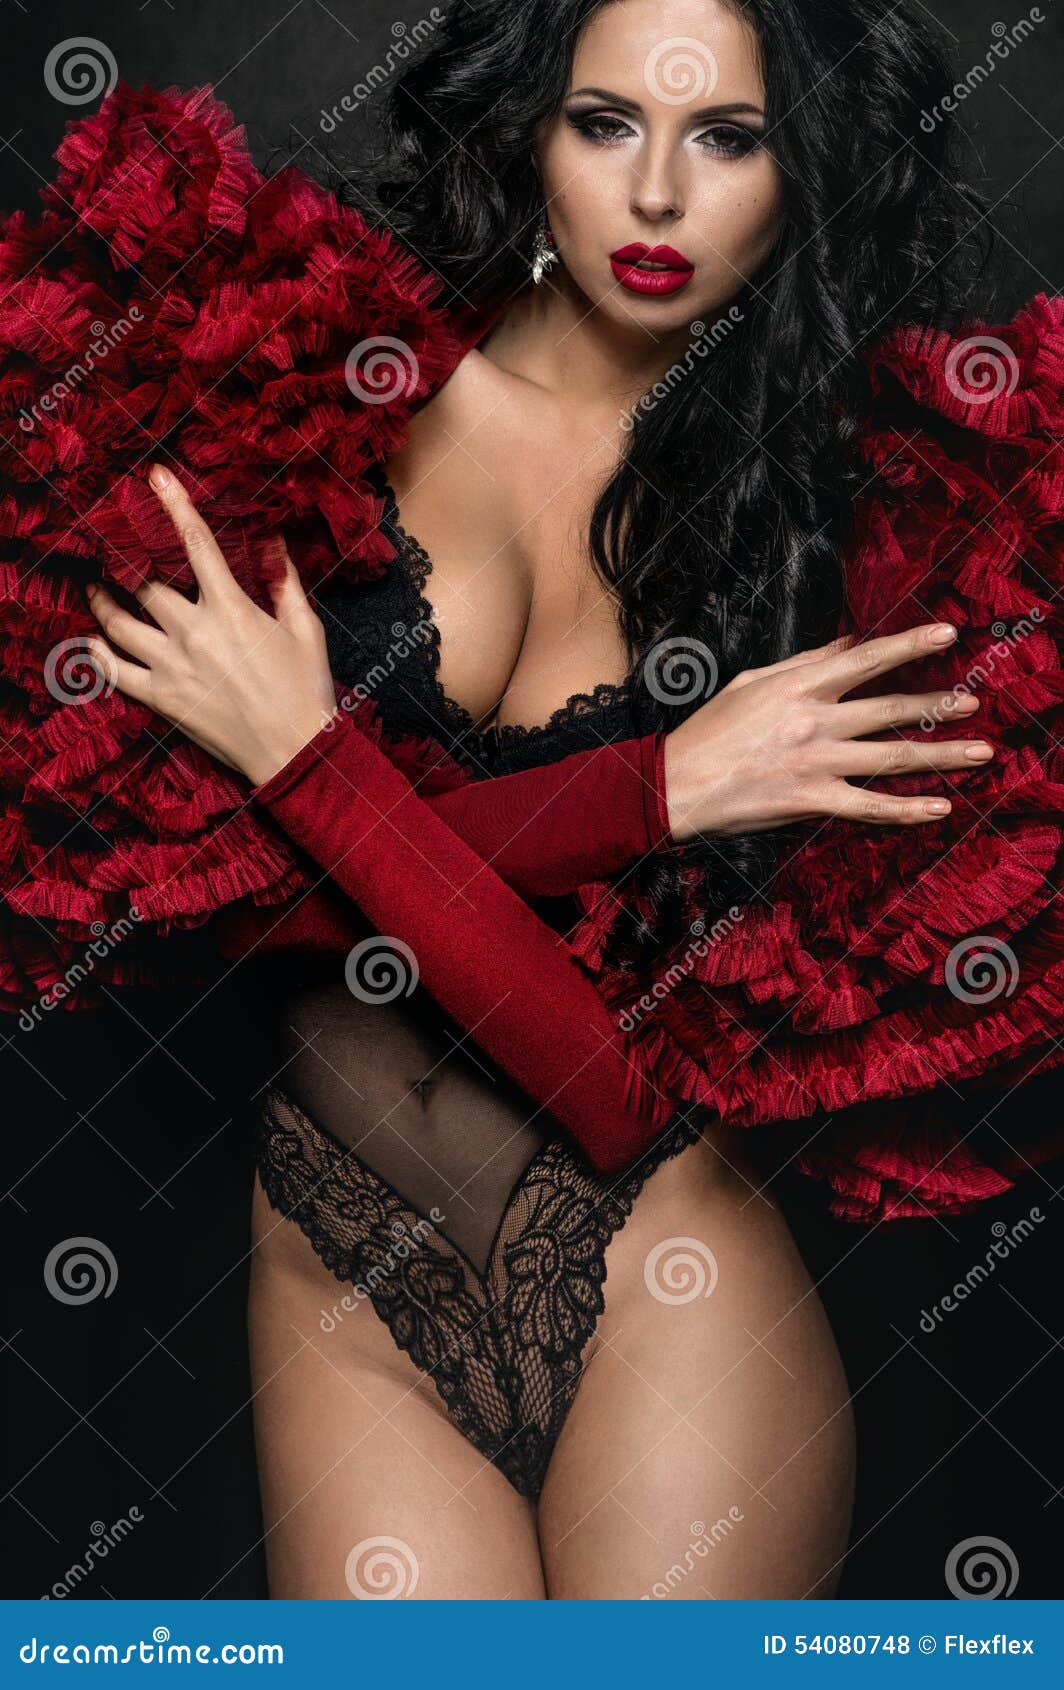 Sexyvwoman in Black Underclothes and Red Fluffy Bolero Stock Photo photo photo